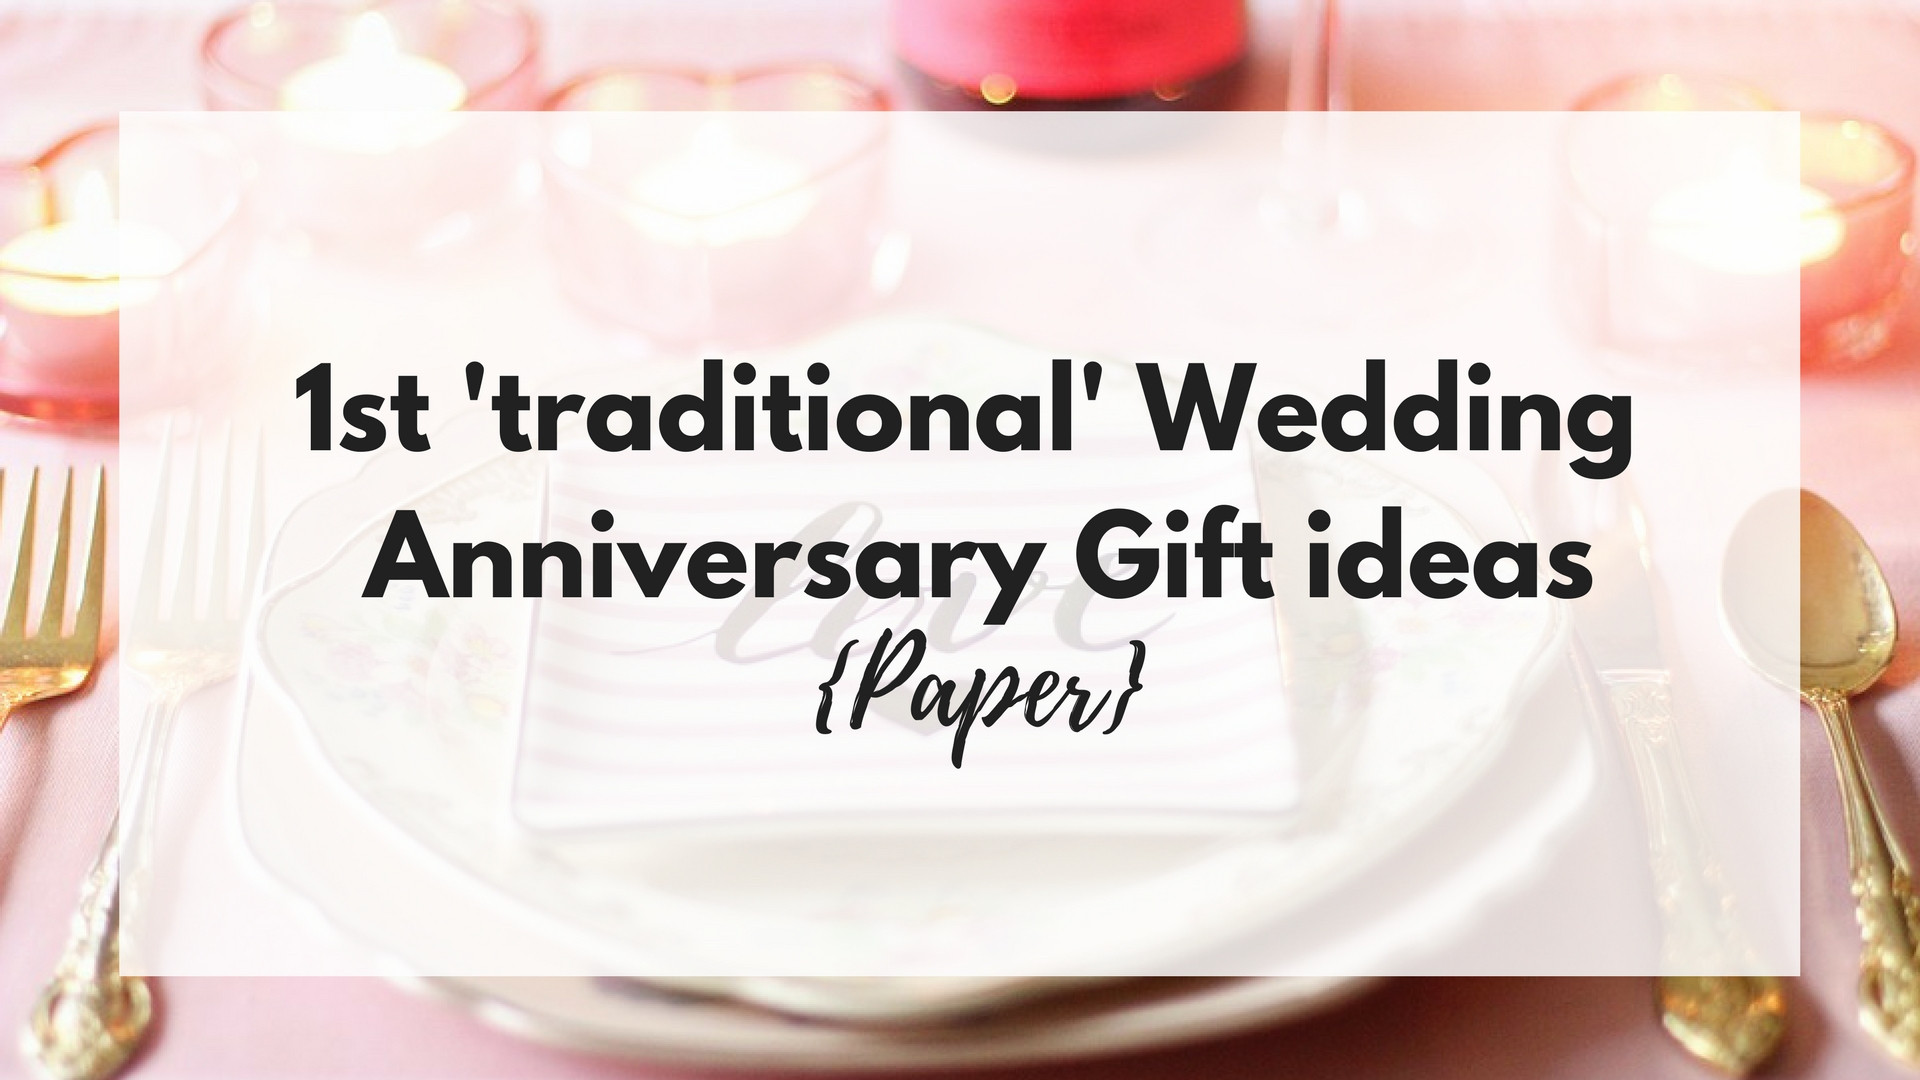 Wedding Anniversary Gift Traditions
 1st ‘traditional’ Wedding Anniversary Gift ideas Paper